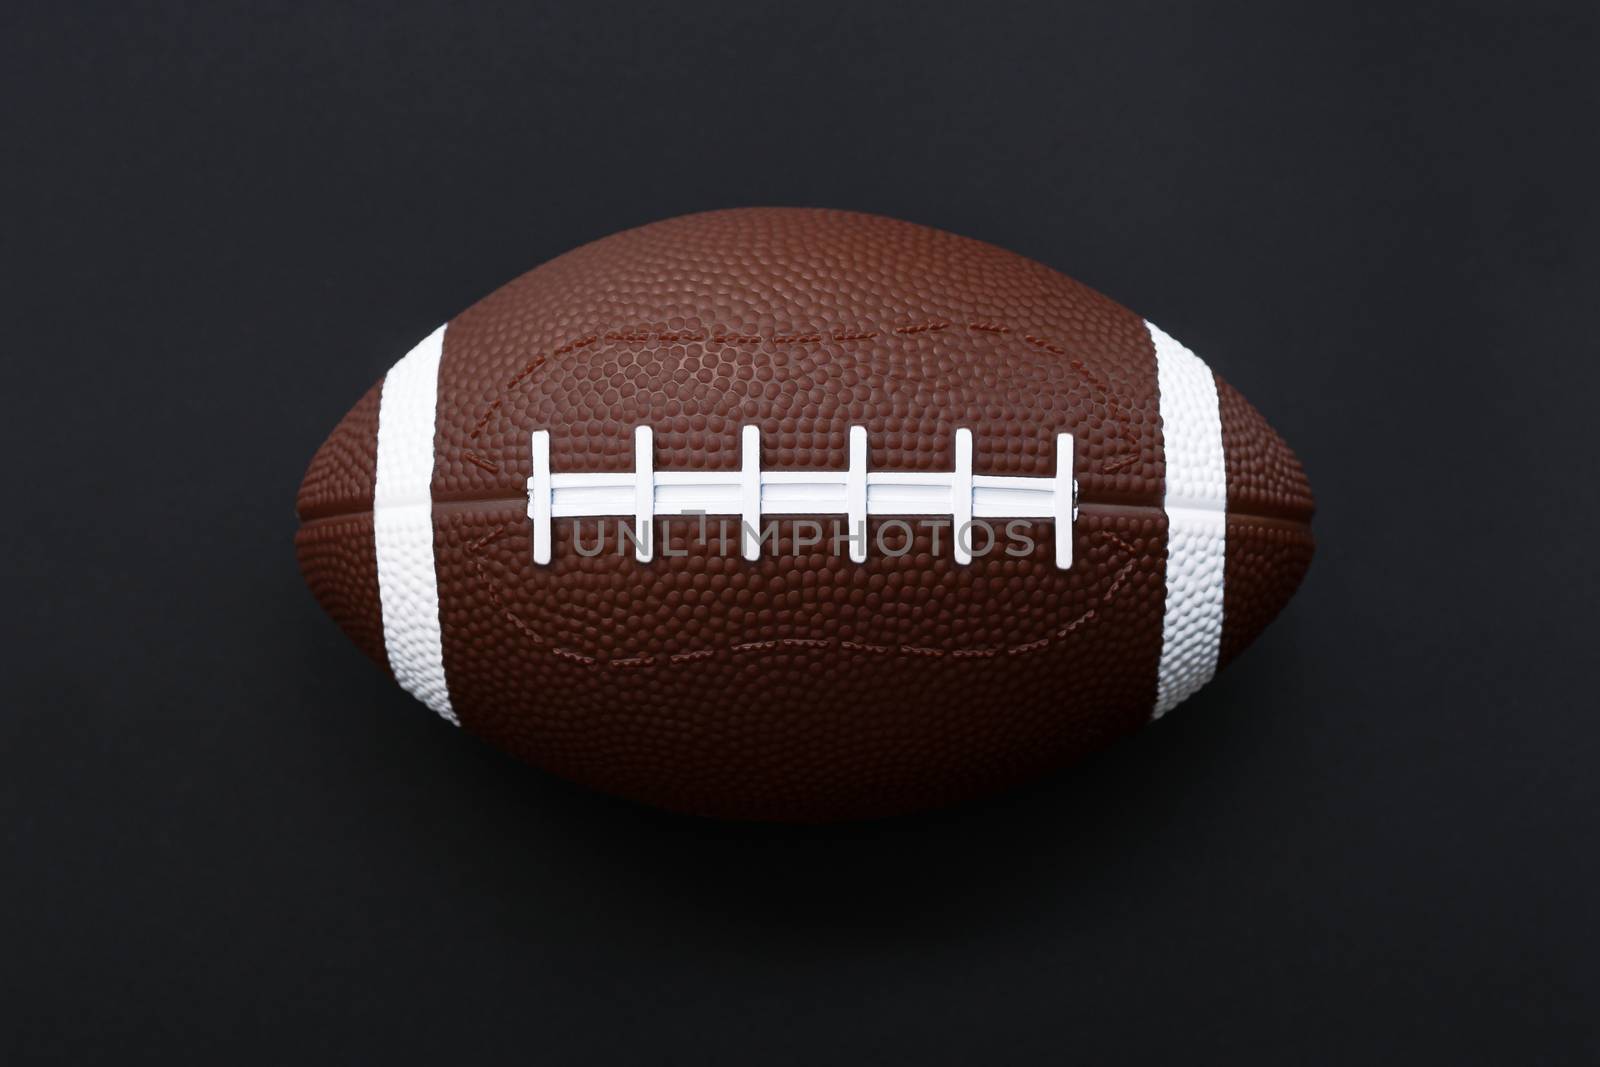 American football isolated on black background . Sport object concept